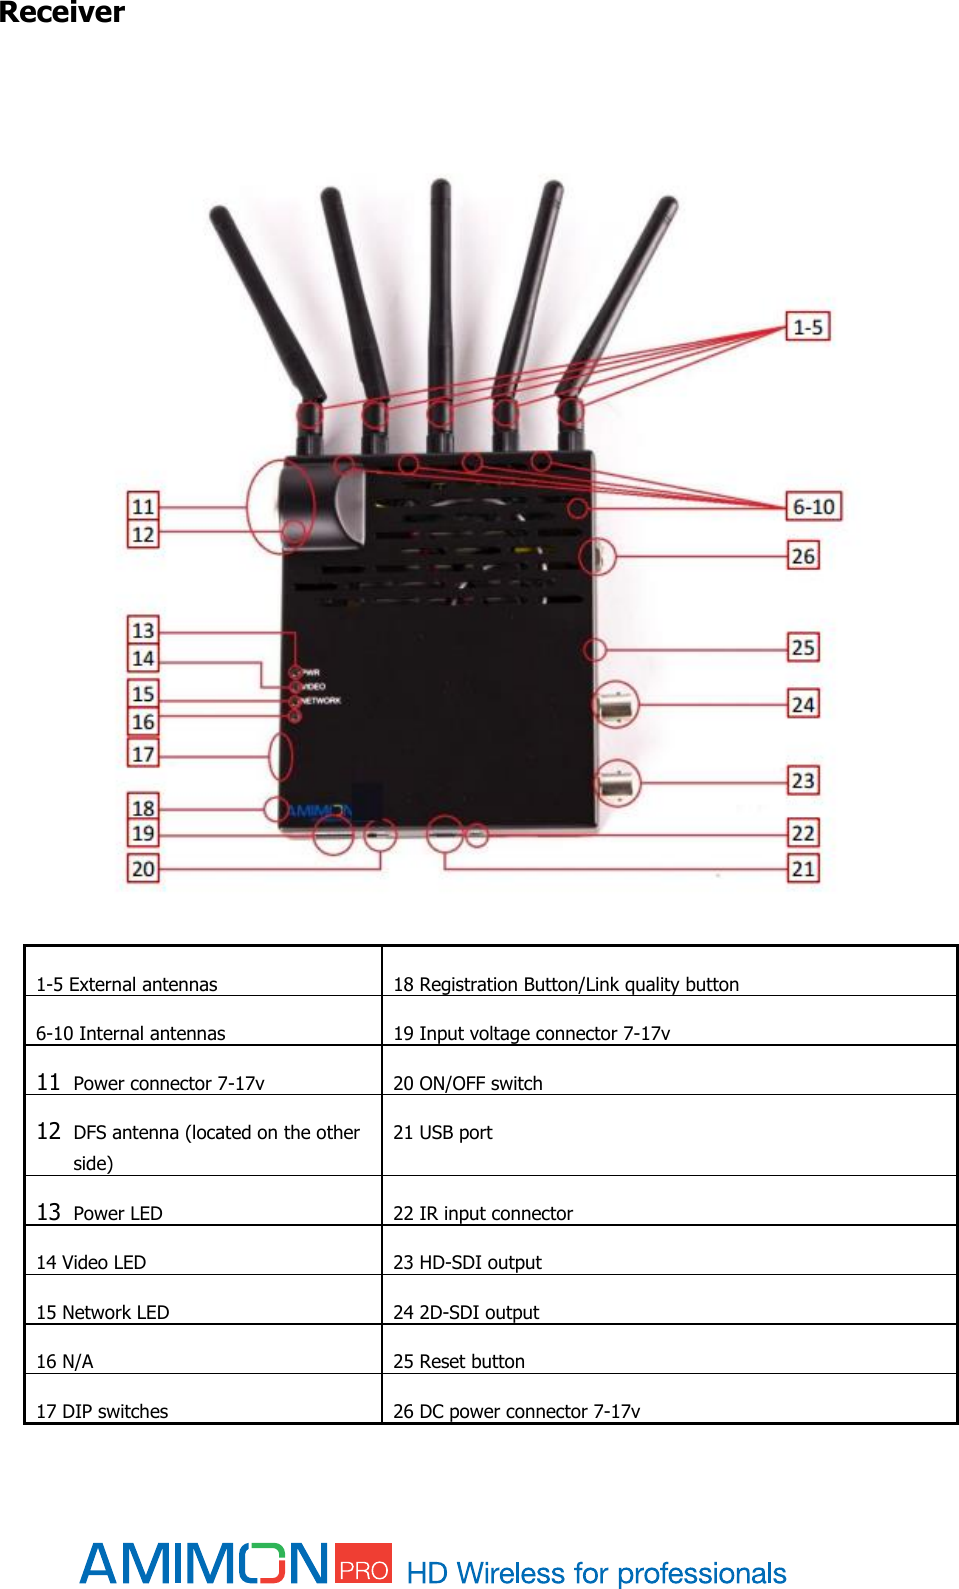  Receiver     1-5 External antennas 18 Registration Button/Link quality button 6-10 Internal antennas 19 Input voltage connector 7-17v 11 Power connector 7-17v 20 ON/OFF switch 12 DFS antenna (located on the other side) 21 USB port 13 Power LED 22 IR input connector 14 Video LED 23 HD-SDI output 15 Network LED 24 2D-SDI output 16 N/A 25 Reset button 17 DIP switches 26 DC power connector 7-17v 